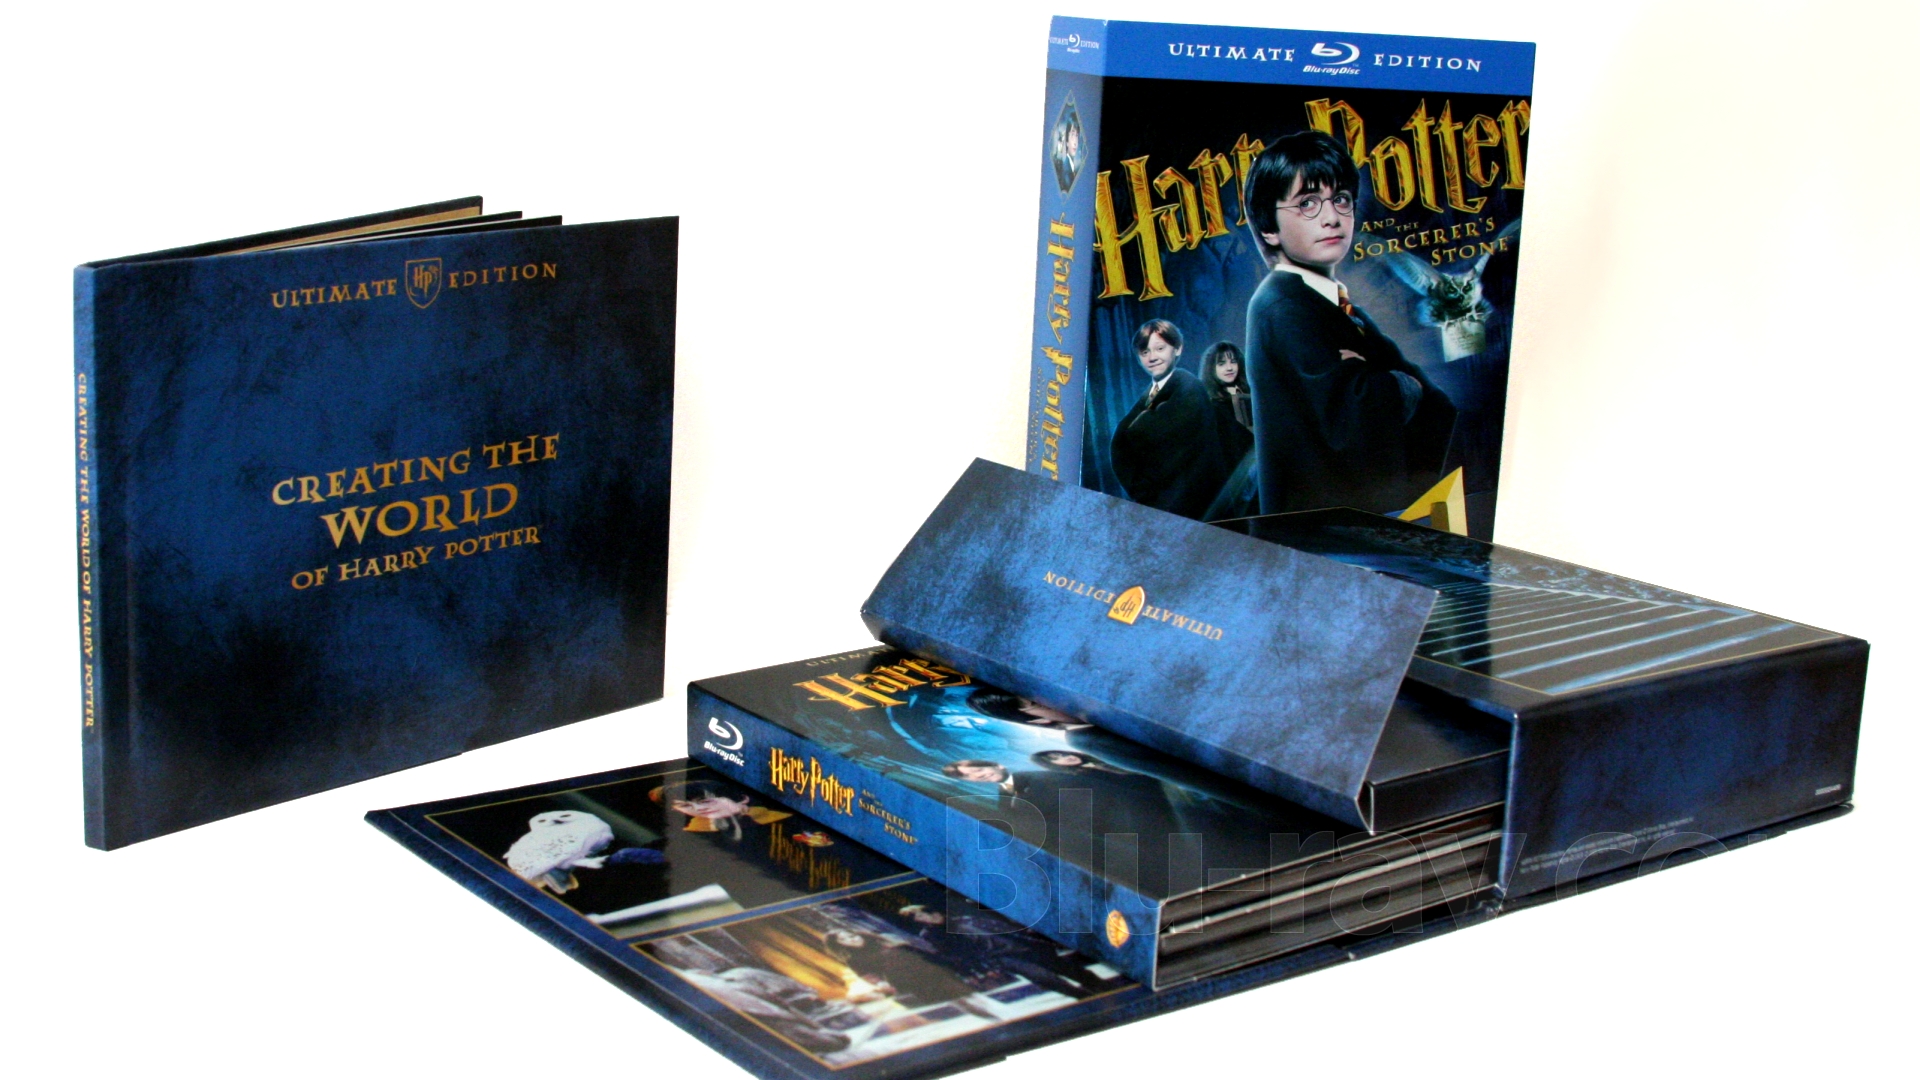 Harry Potter Complete 8 Film Collection Blu Ray Box Set Product Review